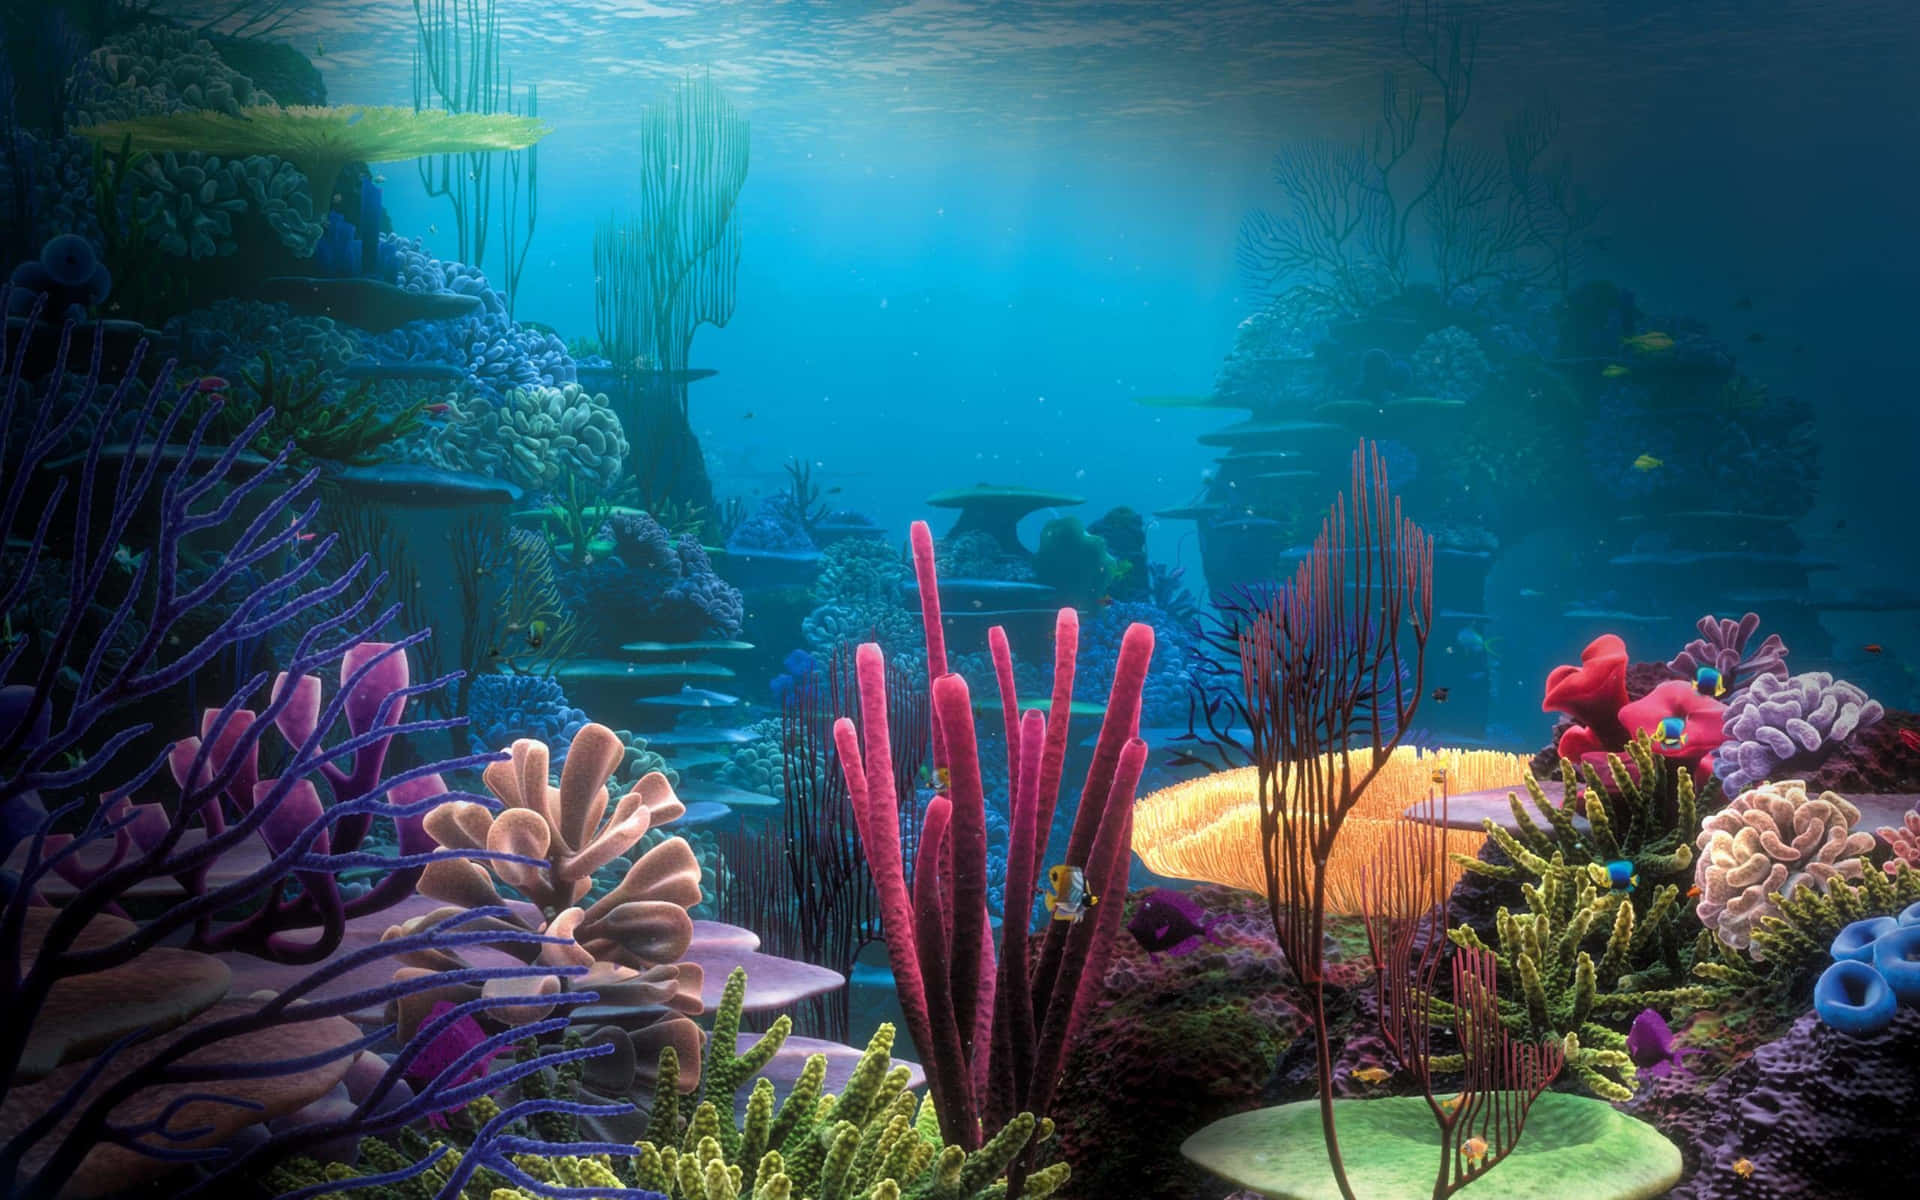 A Colorful Underwater Scene With Corals And Fish